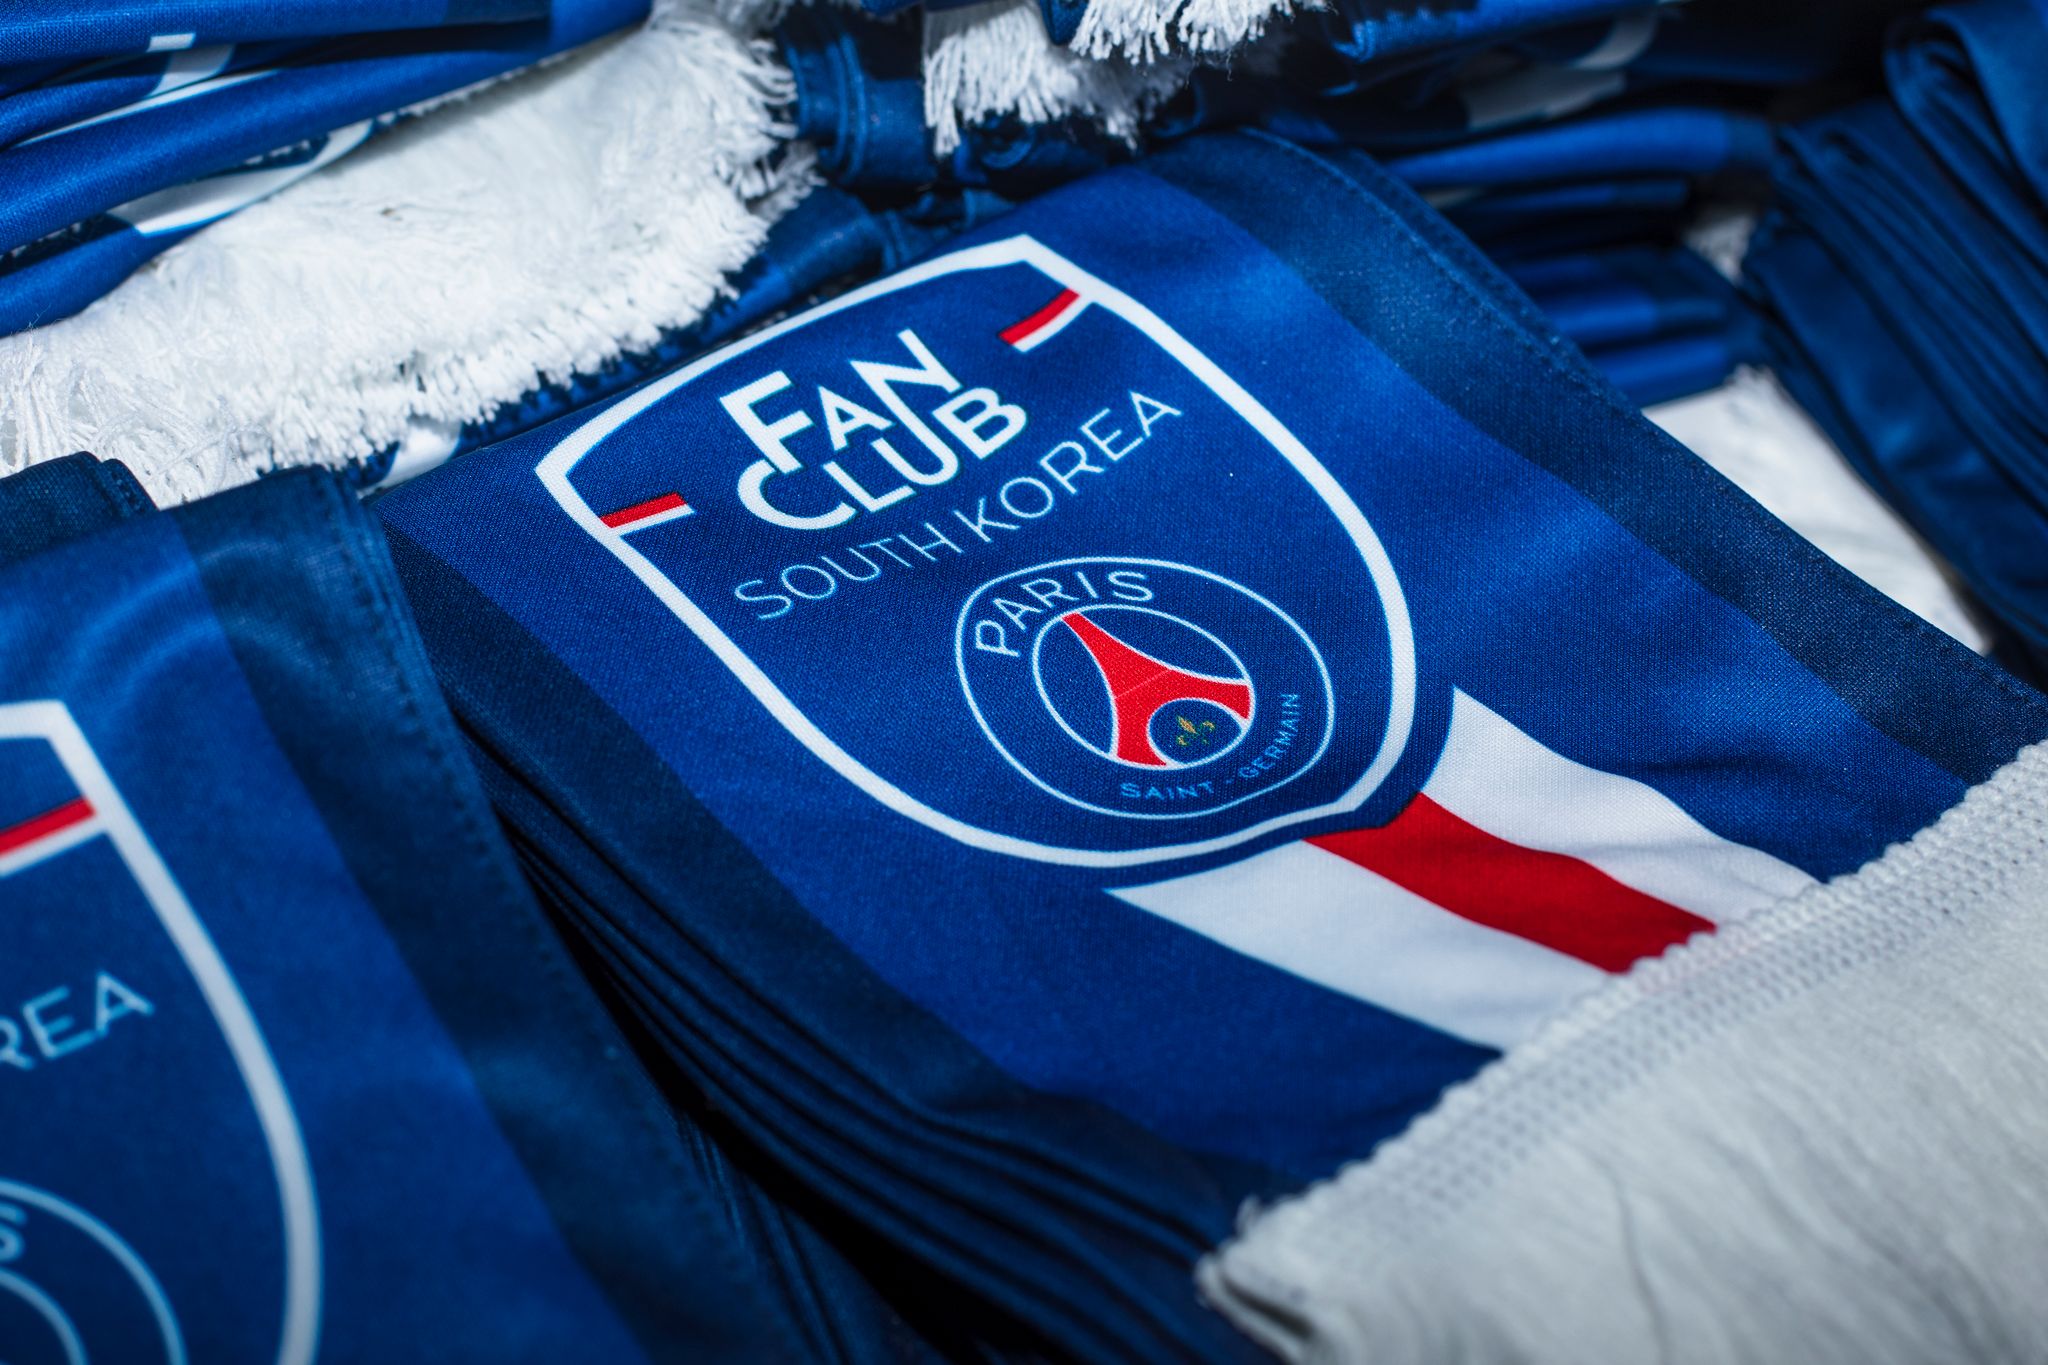 The Fan Clubs present for the PSG store opening in Seoul!  Paris Saint